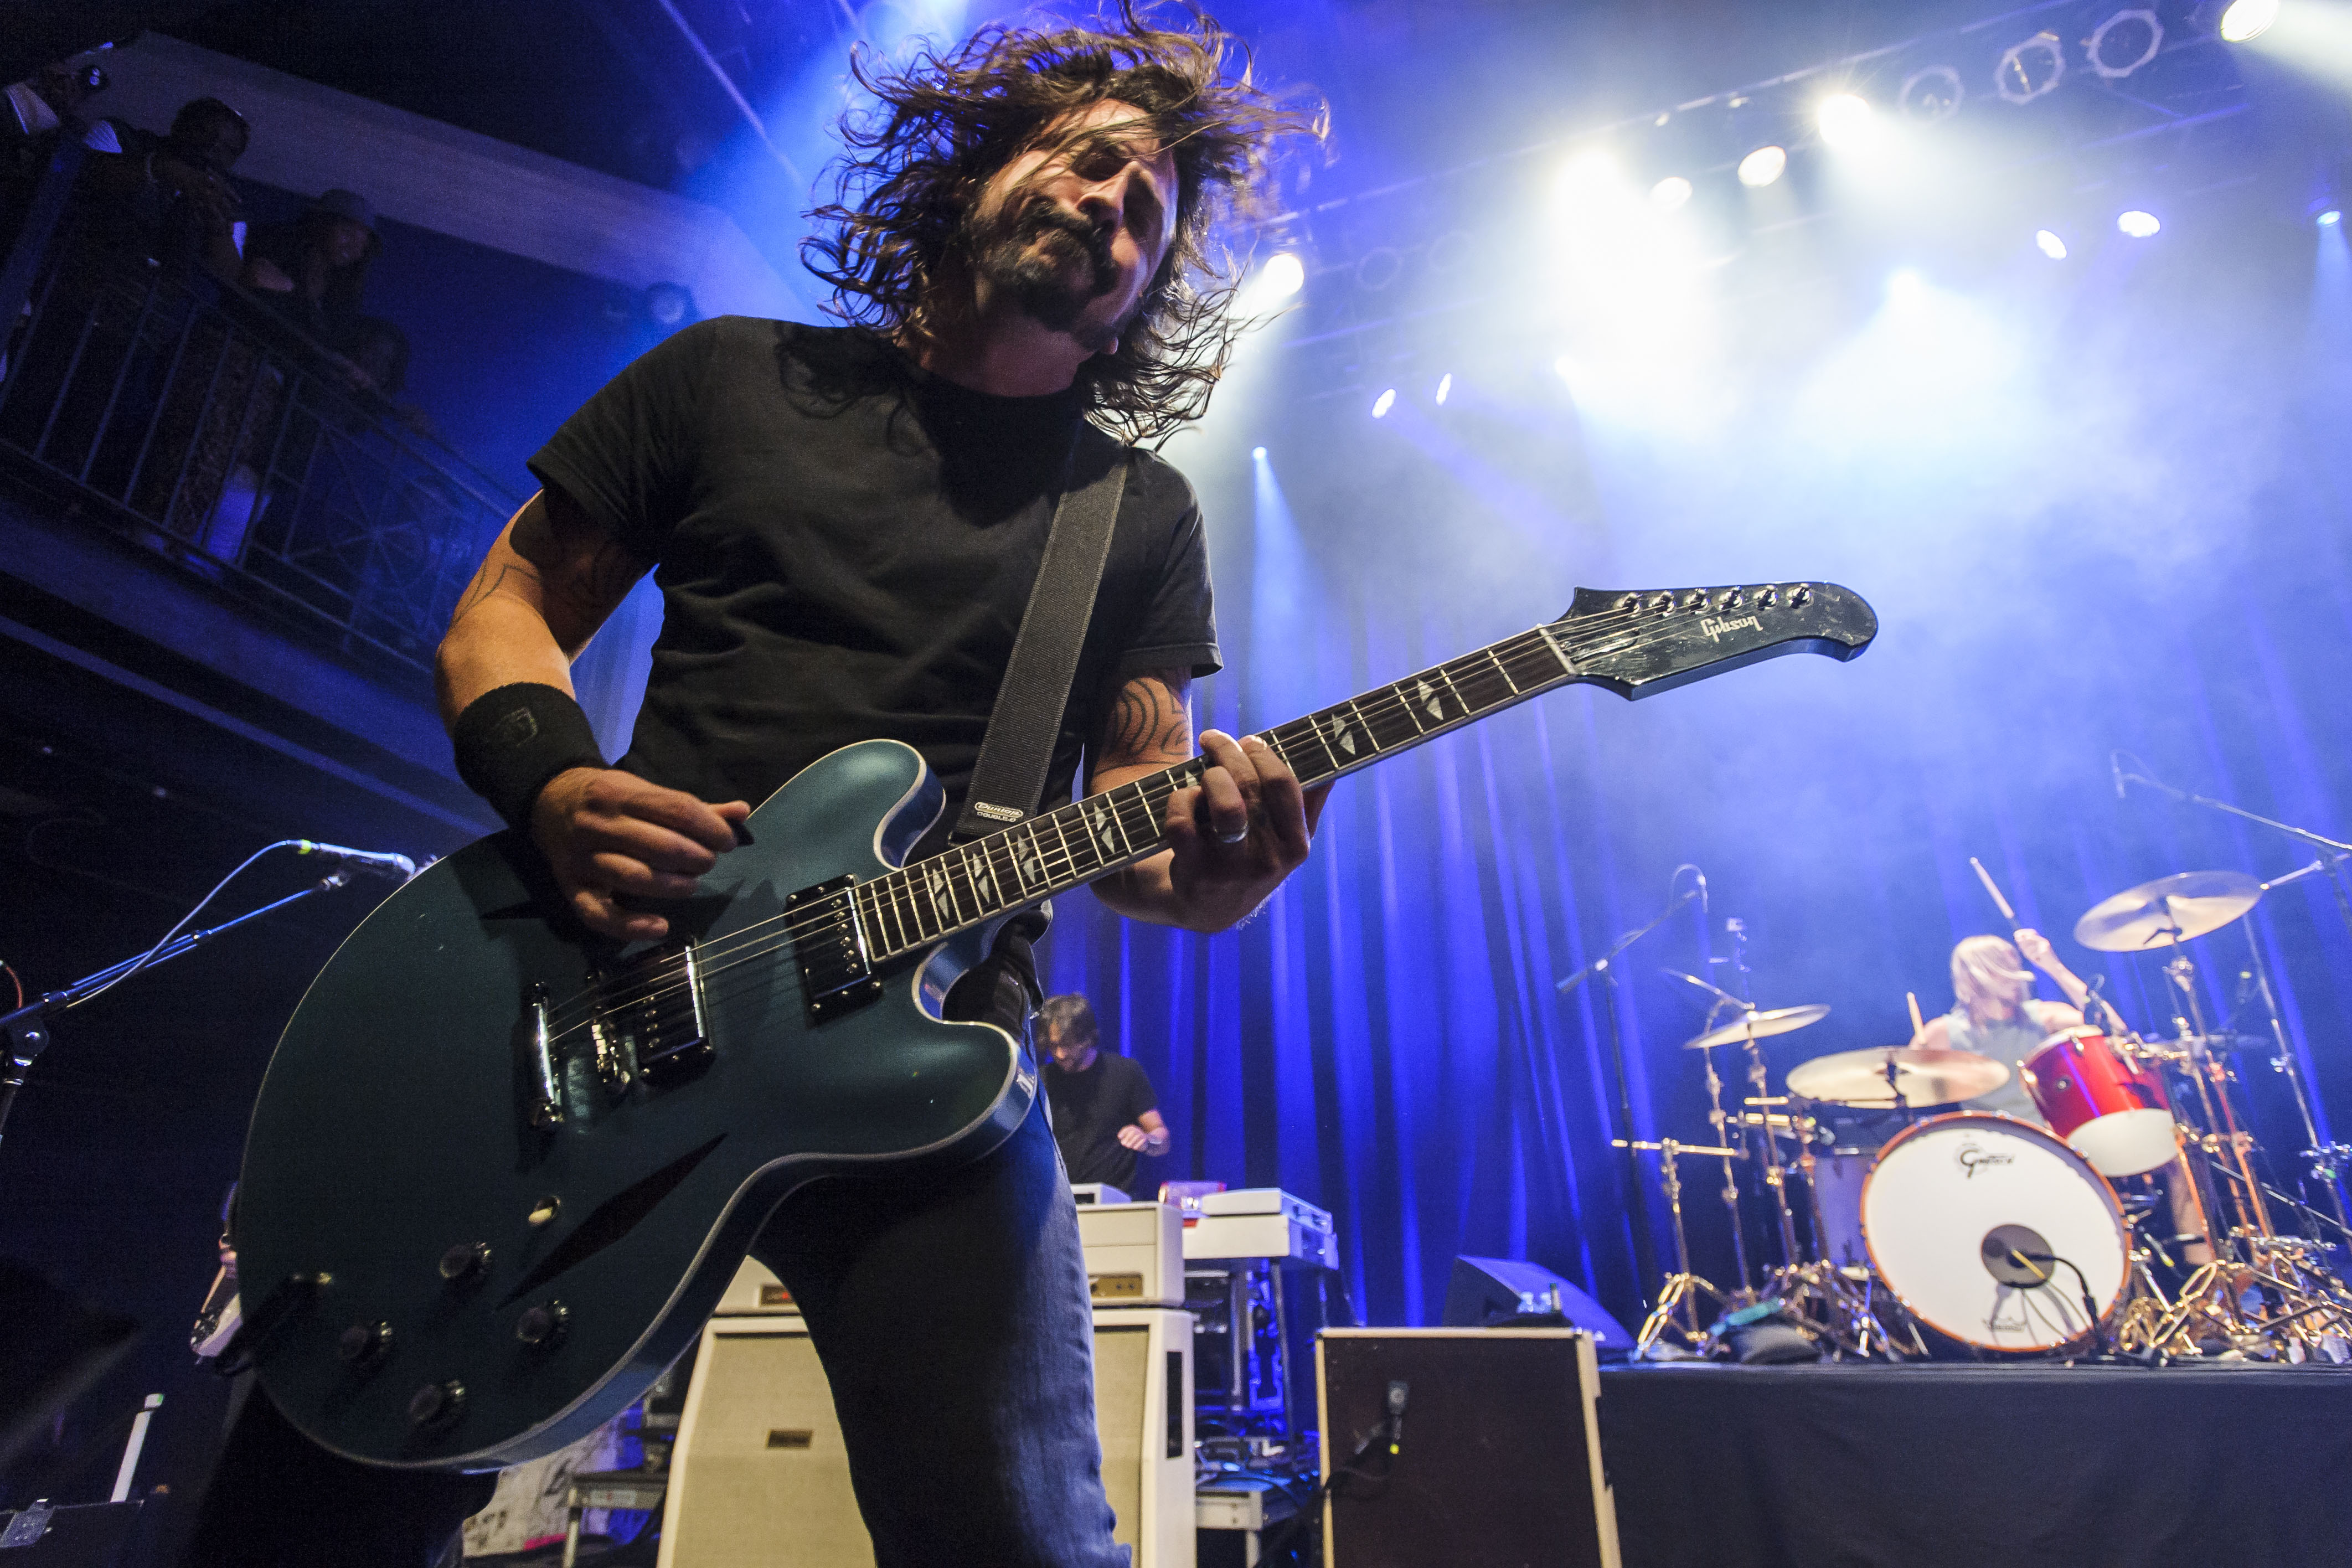 Dave Grohl of the Foo Fighters performs at the 9:30 Club in Washington D.C.